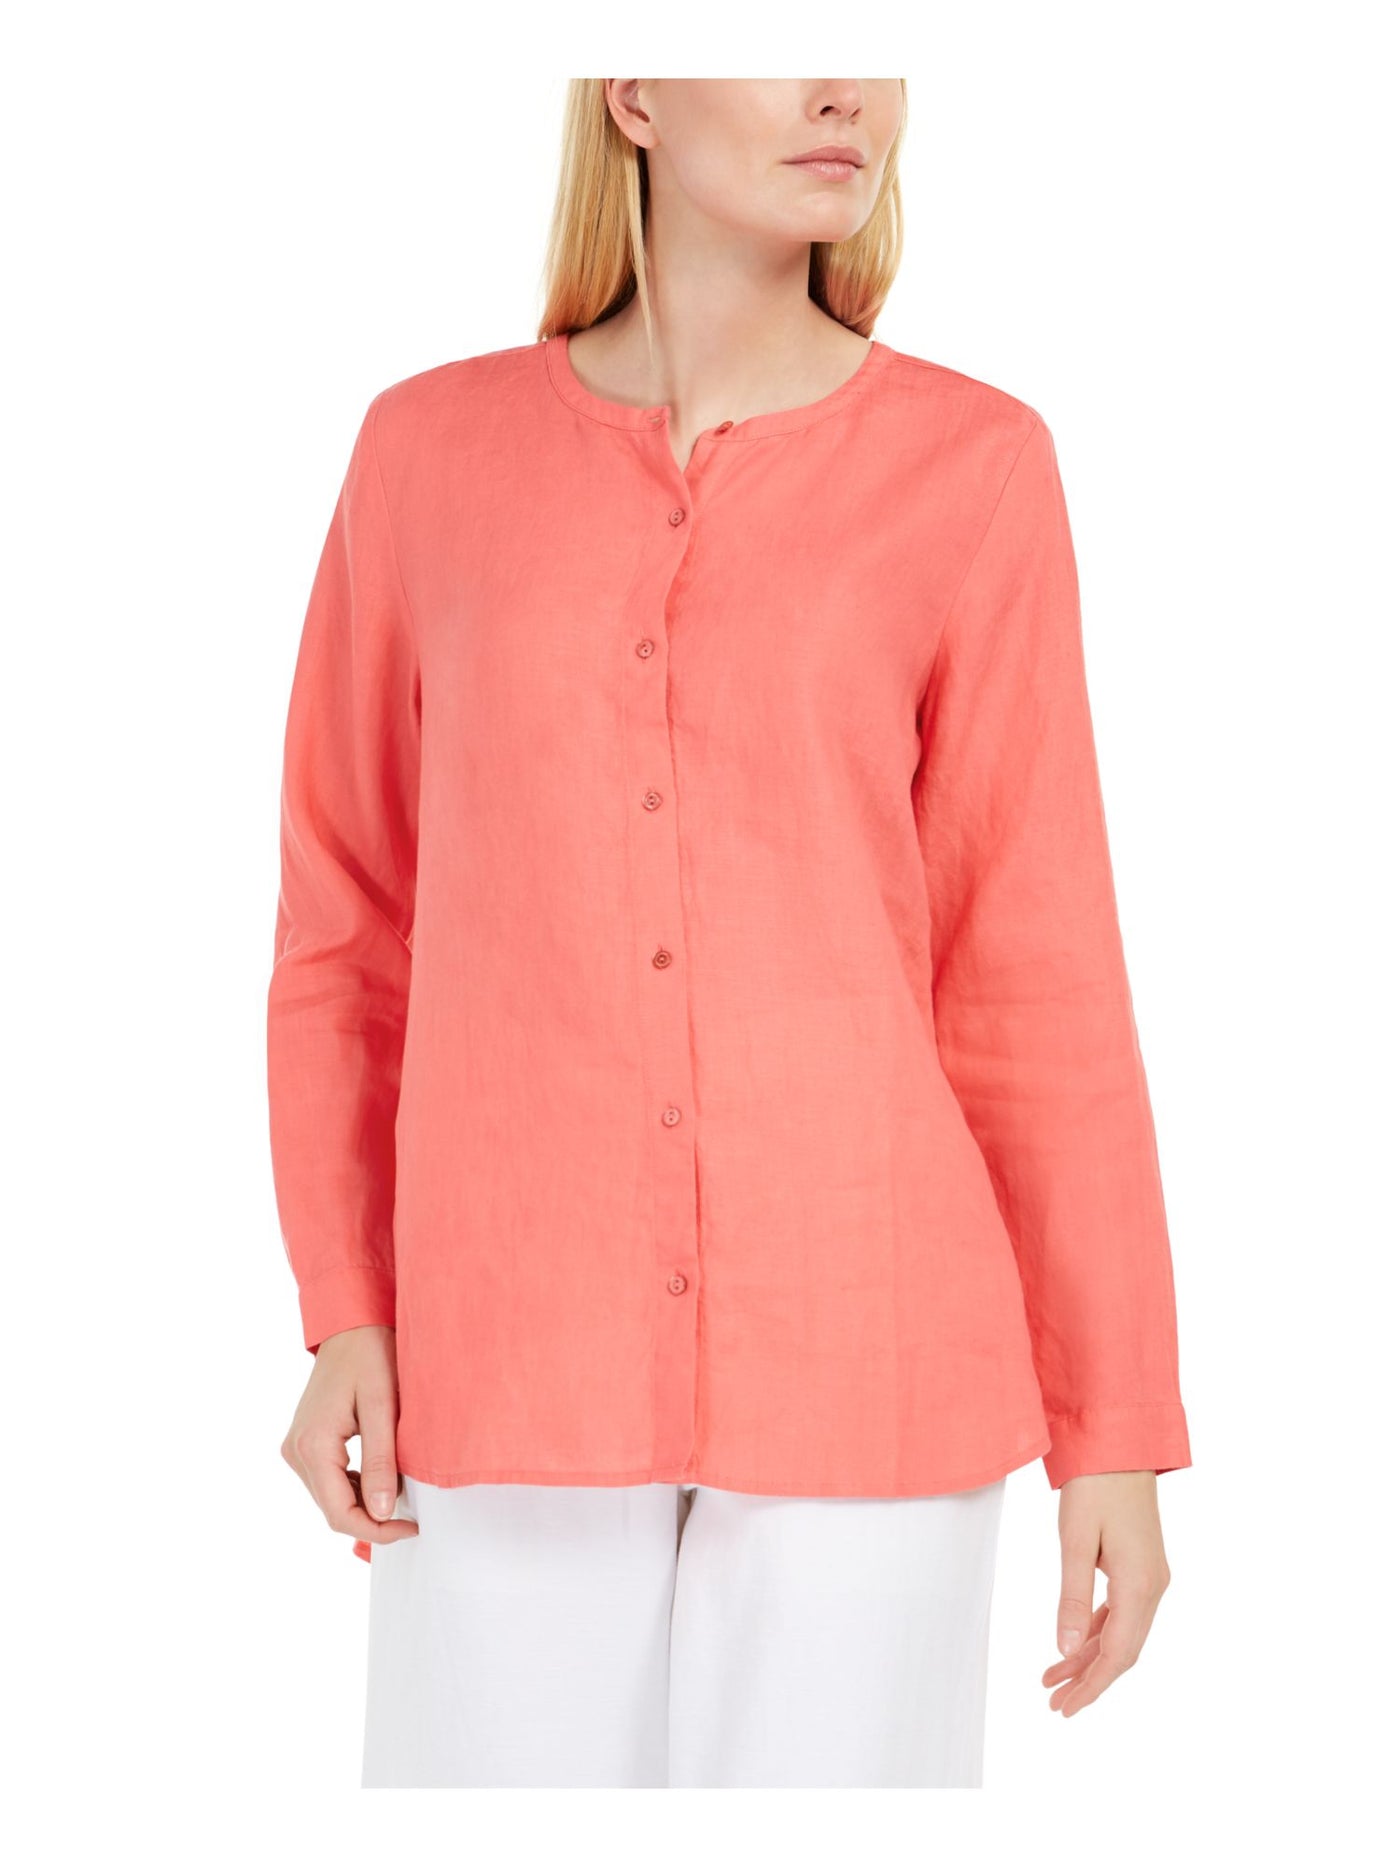 EILEEN FISHER Womens Pink Long Sleeve Jewel Neck Button Up Top L